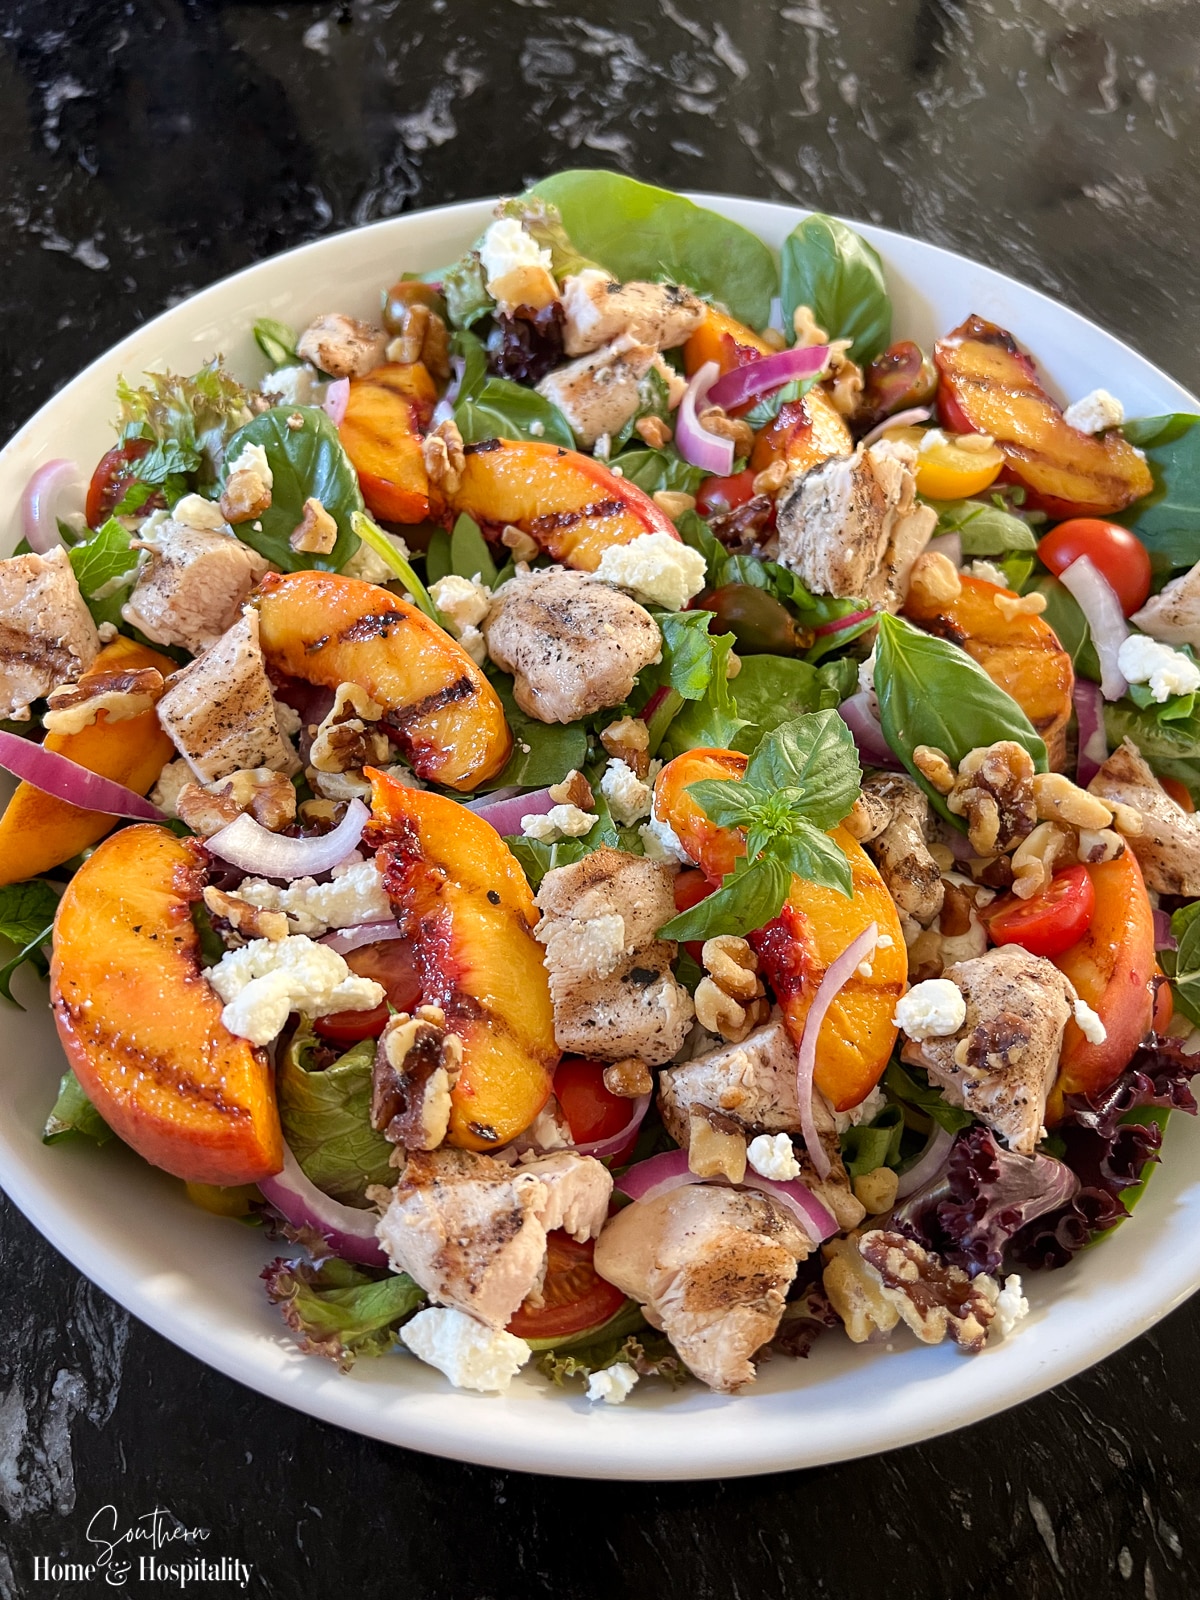 Grilled Peach Salad with Chicken: A Flavor-Filled Summer Meal